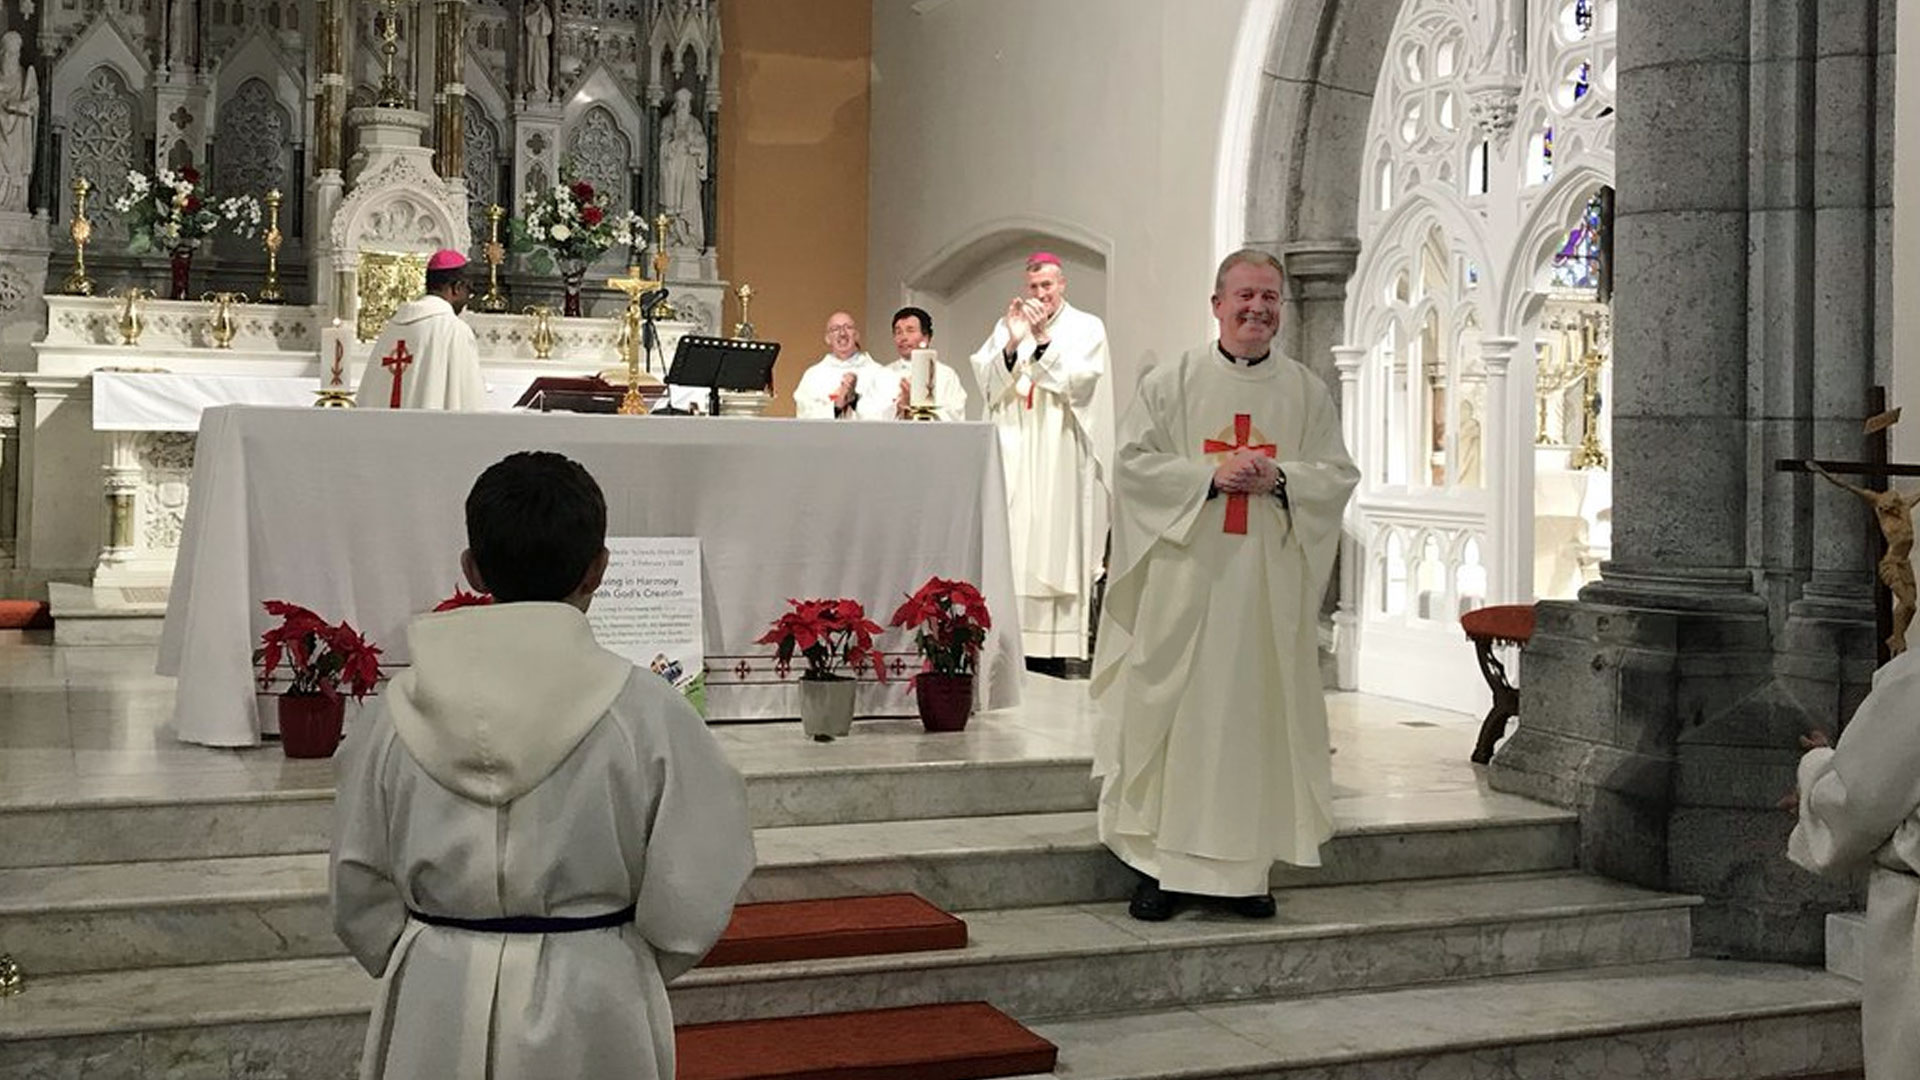 “It is about call and response” – Bishop Elect Paul Dempsey